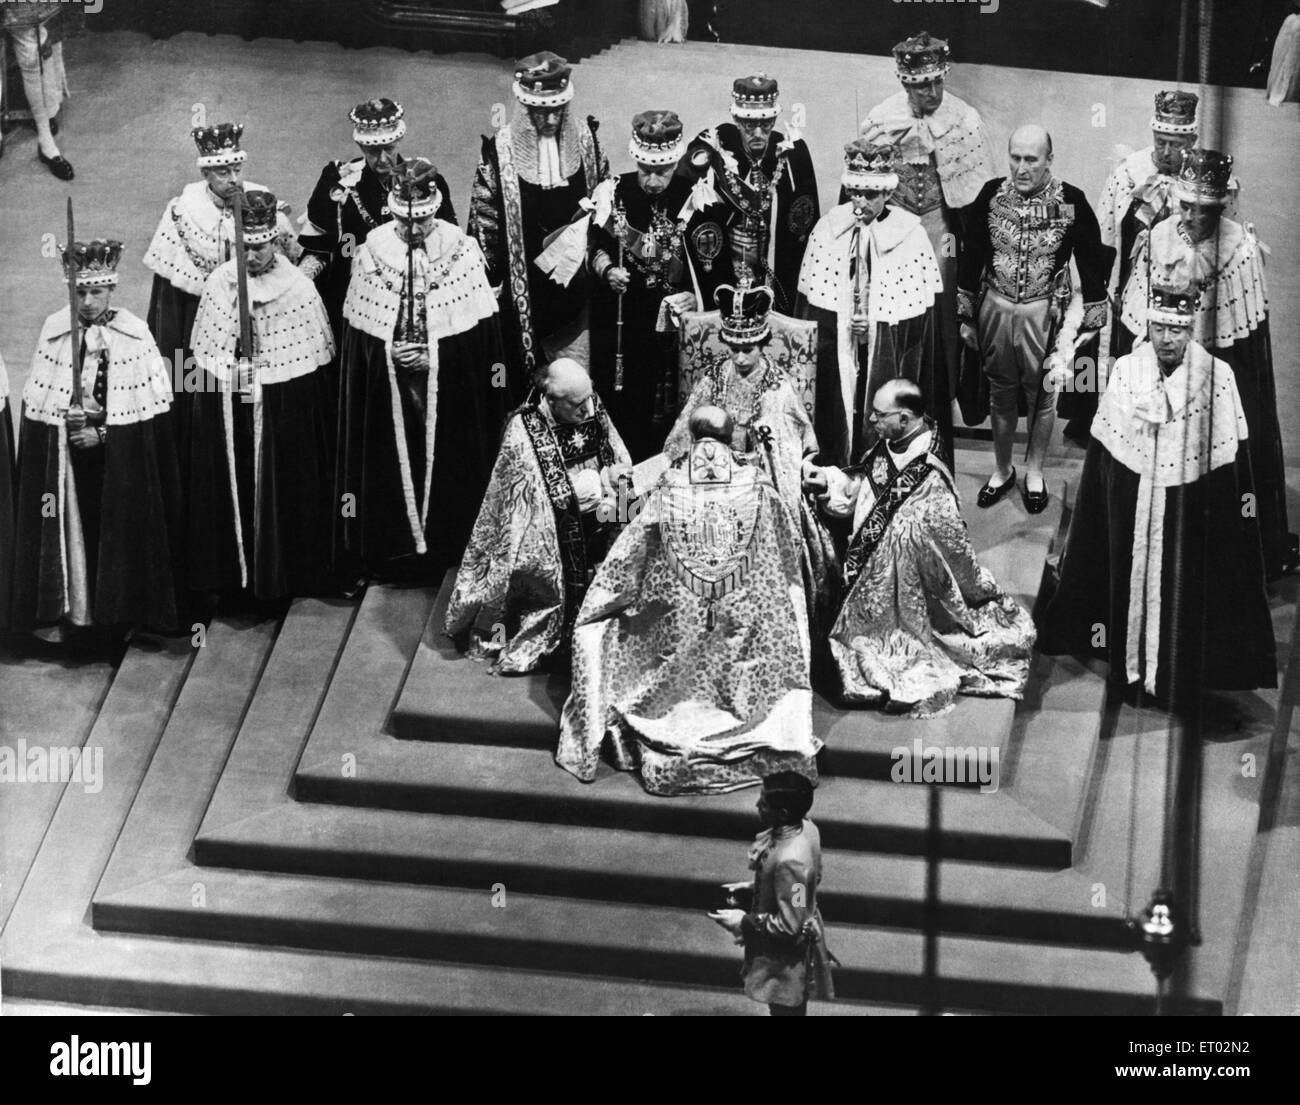 The Coronation of Queen Elizabeth II was the ceremony in which the newly ascended monarch, Elizabeth II, was crowned Queen of the United Kingdom, Canada, Australia, New Zealand, South Africa, Ceylon, and Pakistan, as well as taking on the role of Head of Stock Photo